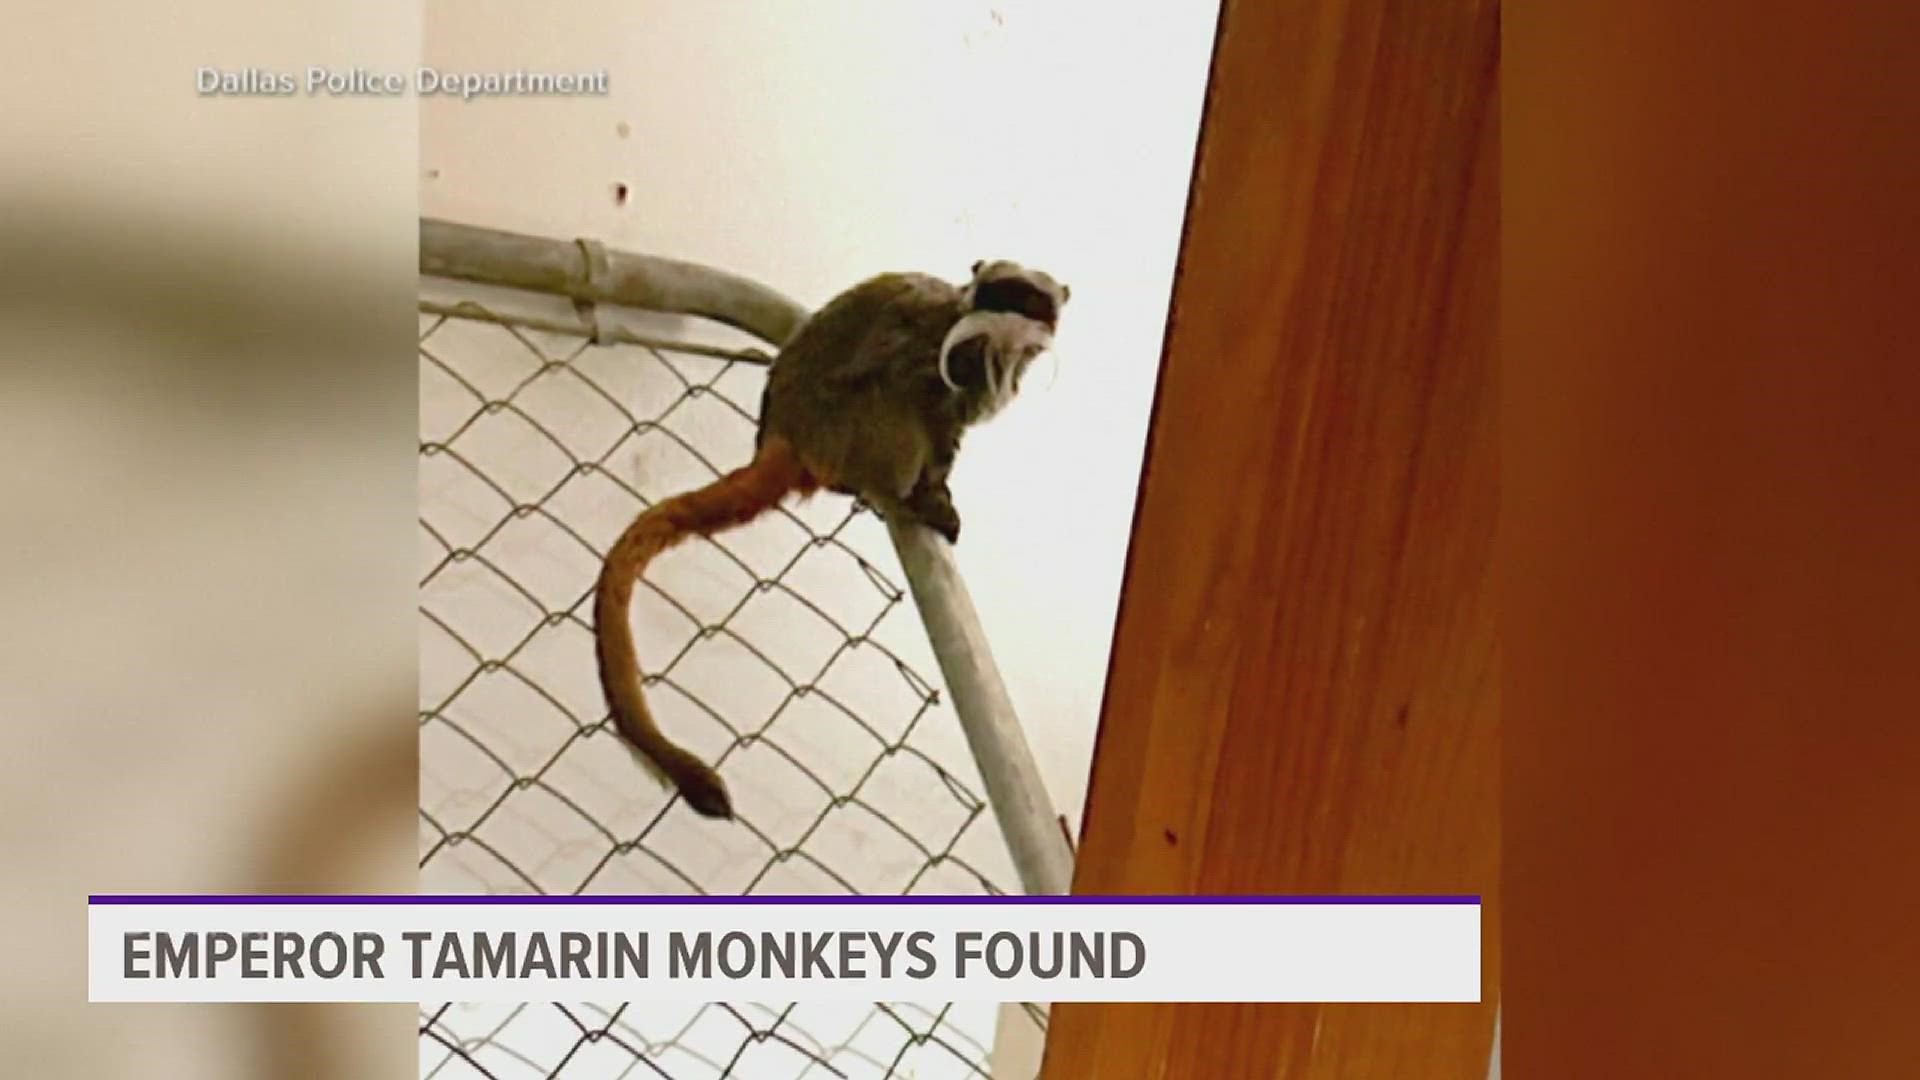 The two emperor tamarin monkeys had gone missing on Monday. Authorities believe they were intentionally taken.